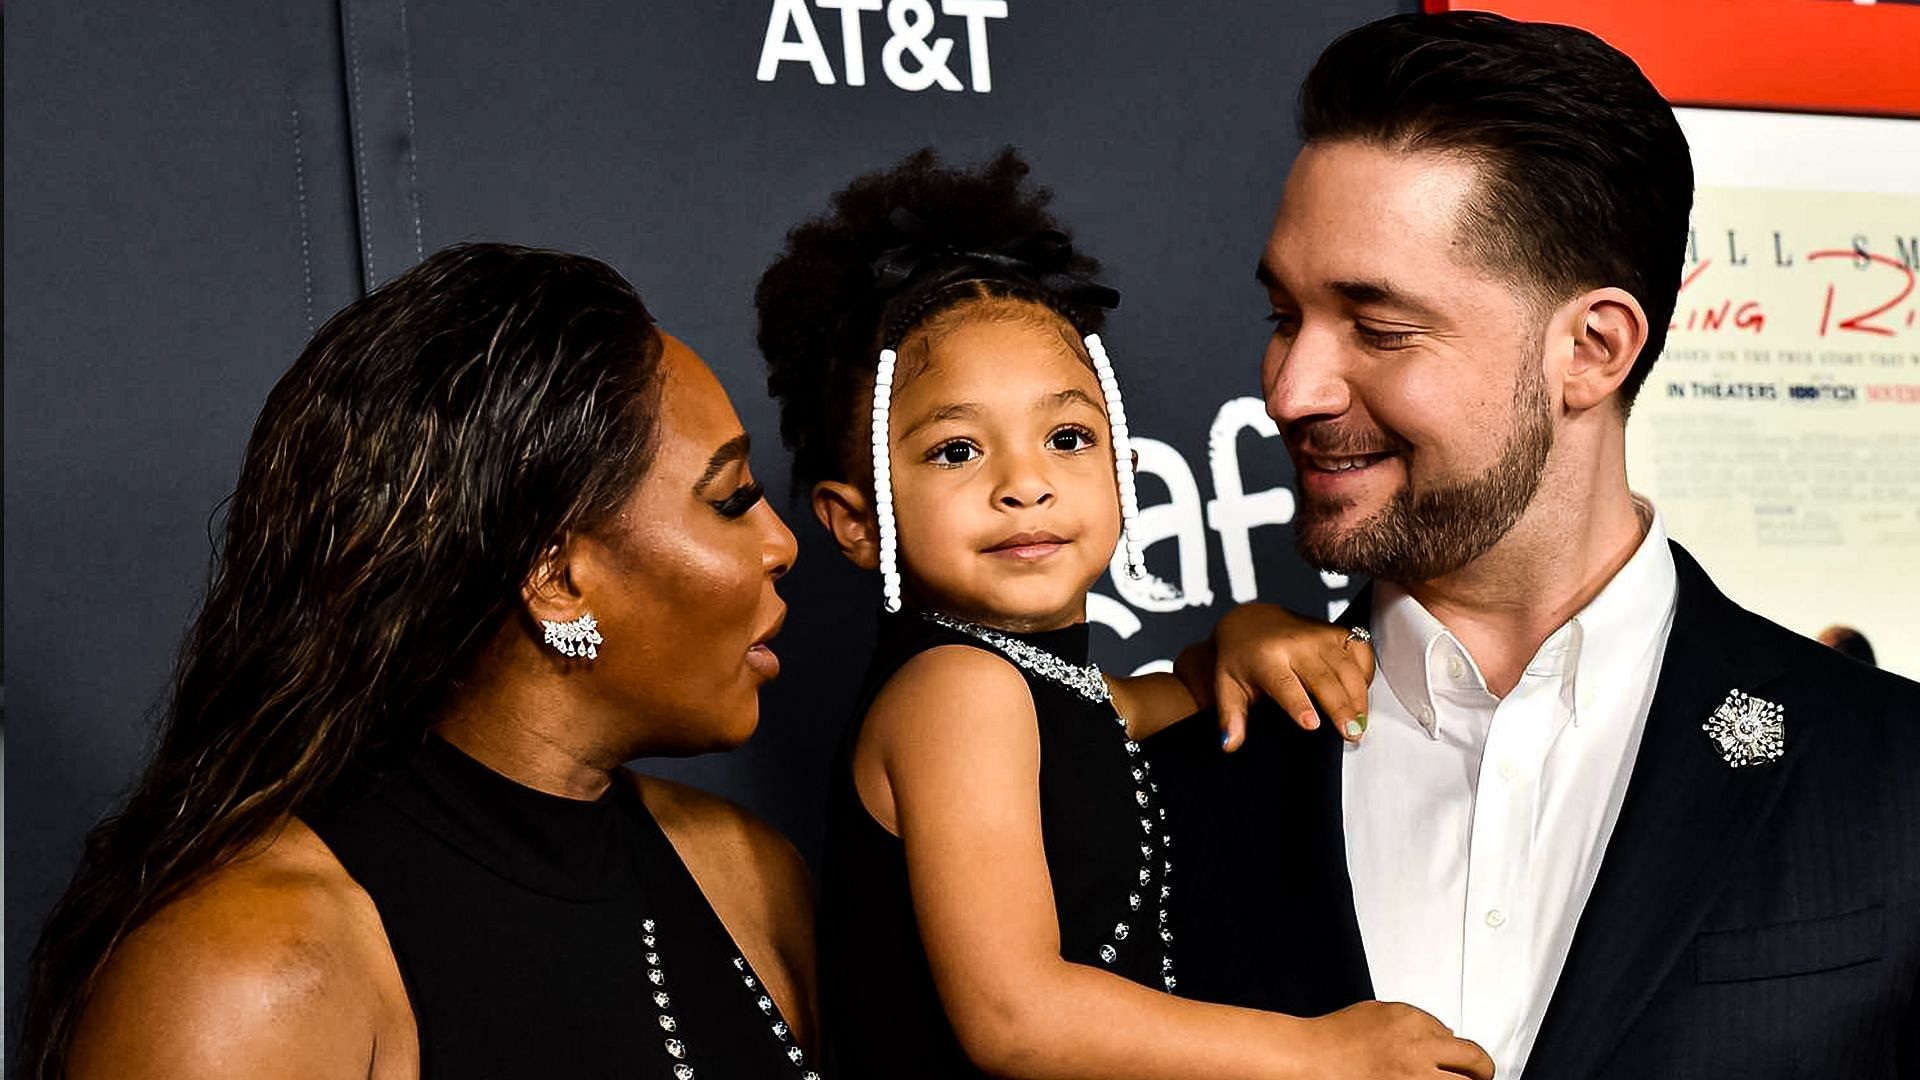 Family and friends are the ones with whom Serena Williams&#039; husband wants to spend his time